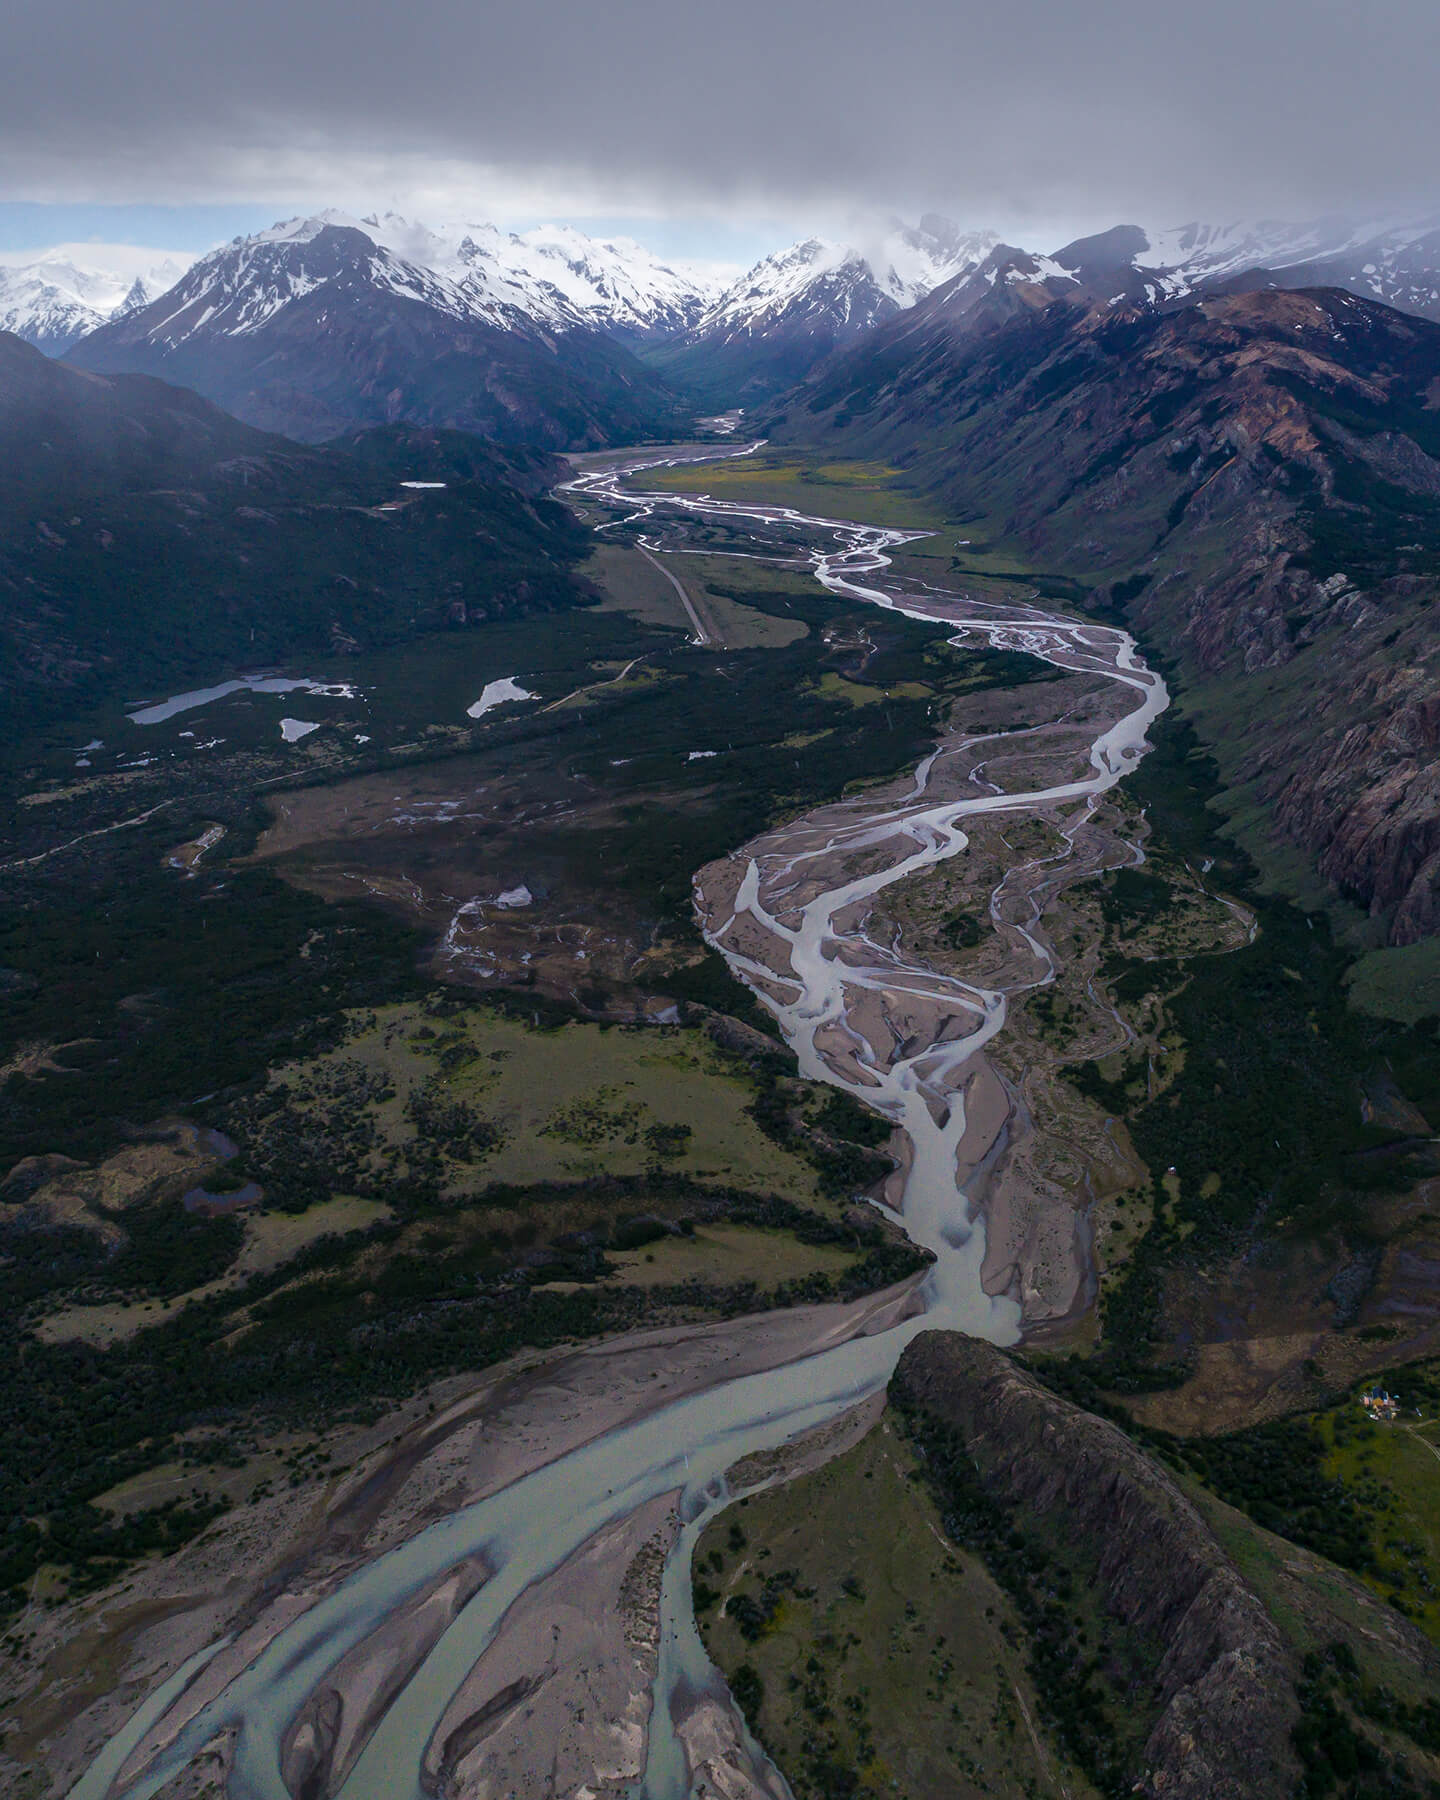 A 10,000-foot view of the Andes range draining into the Las Vueltas River